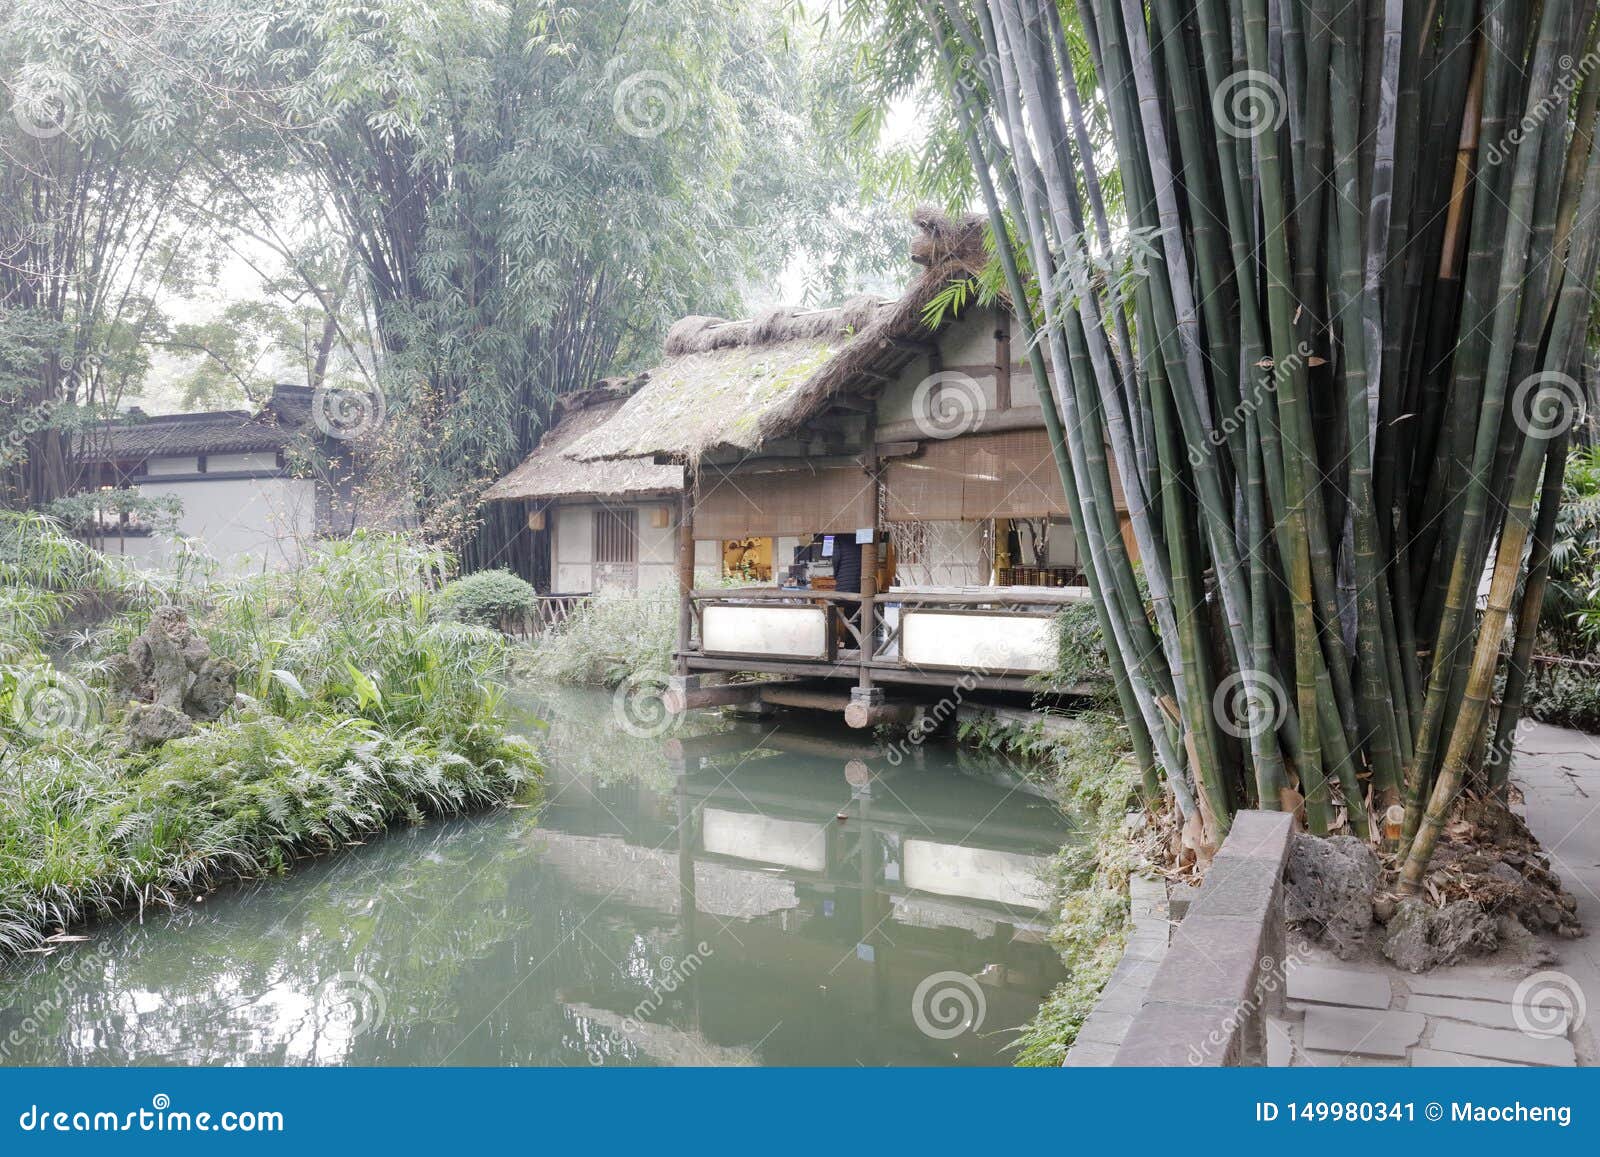 Famous Du Fu Thatched Cottage By Pond Adobe Rgb Editorial Photo